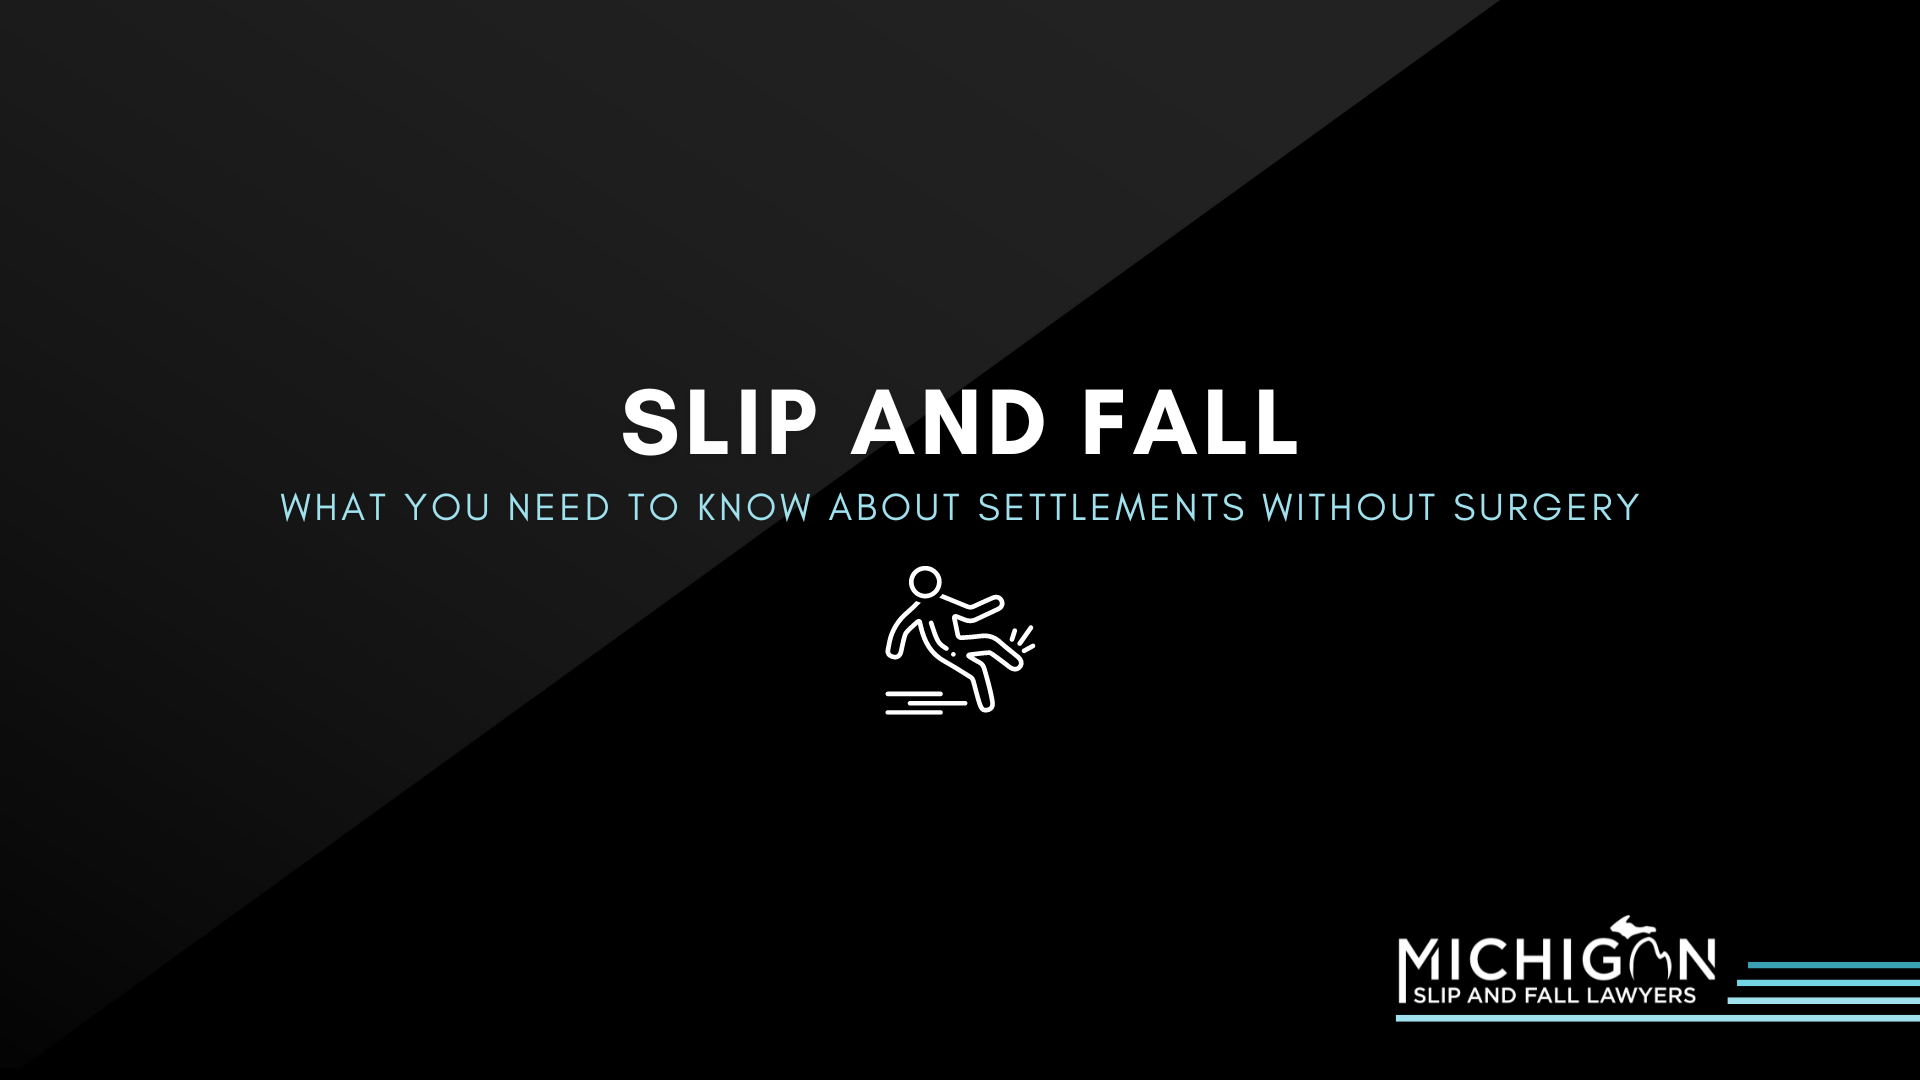 Can You Get Slip and Fall Settlements Without Surgery In Michigan?